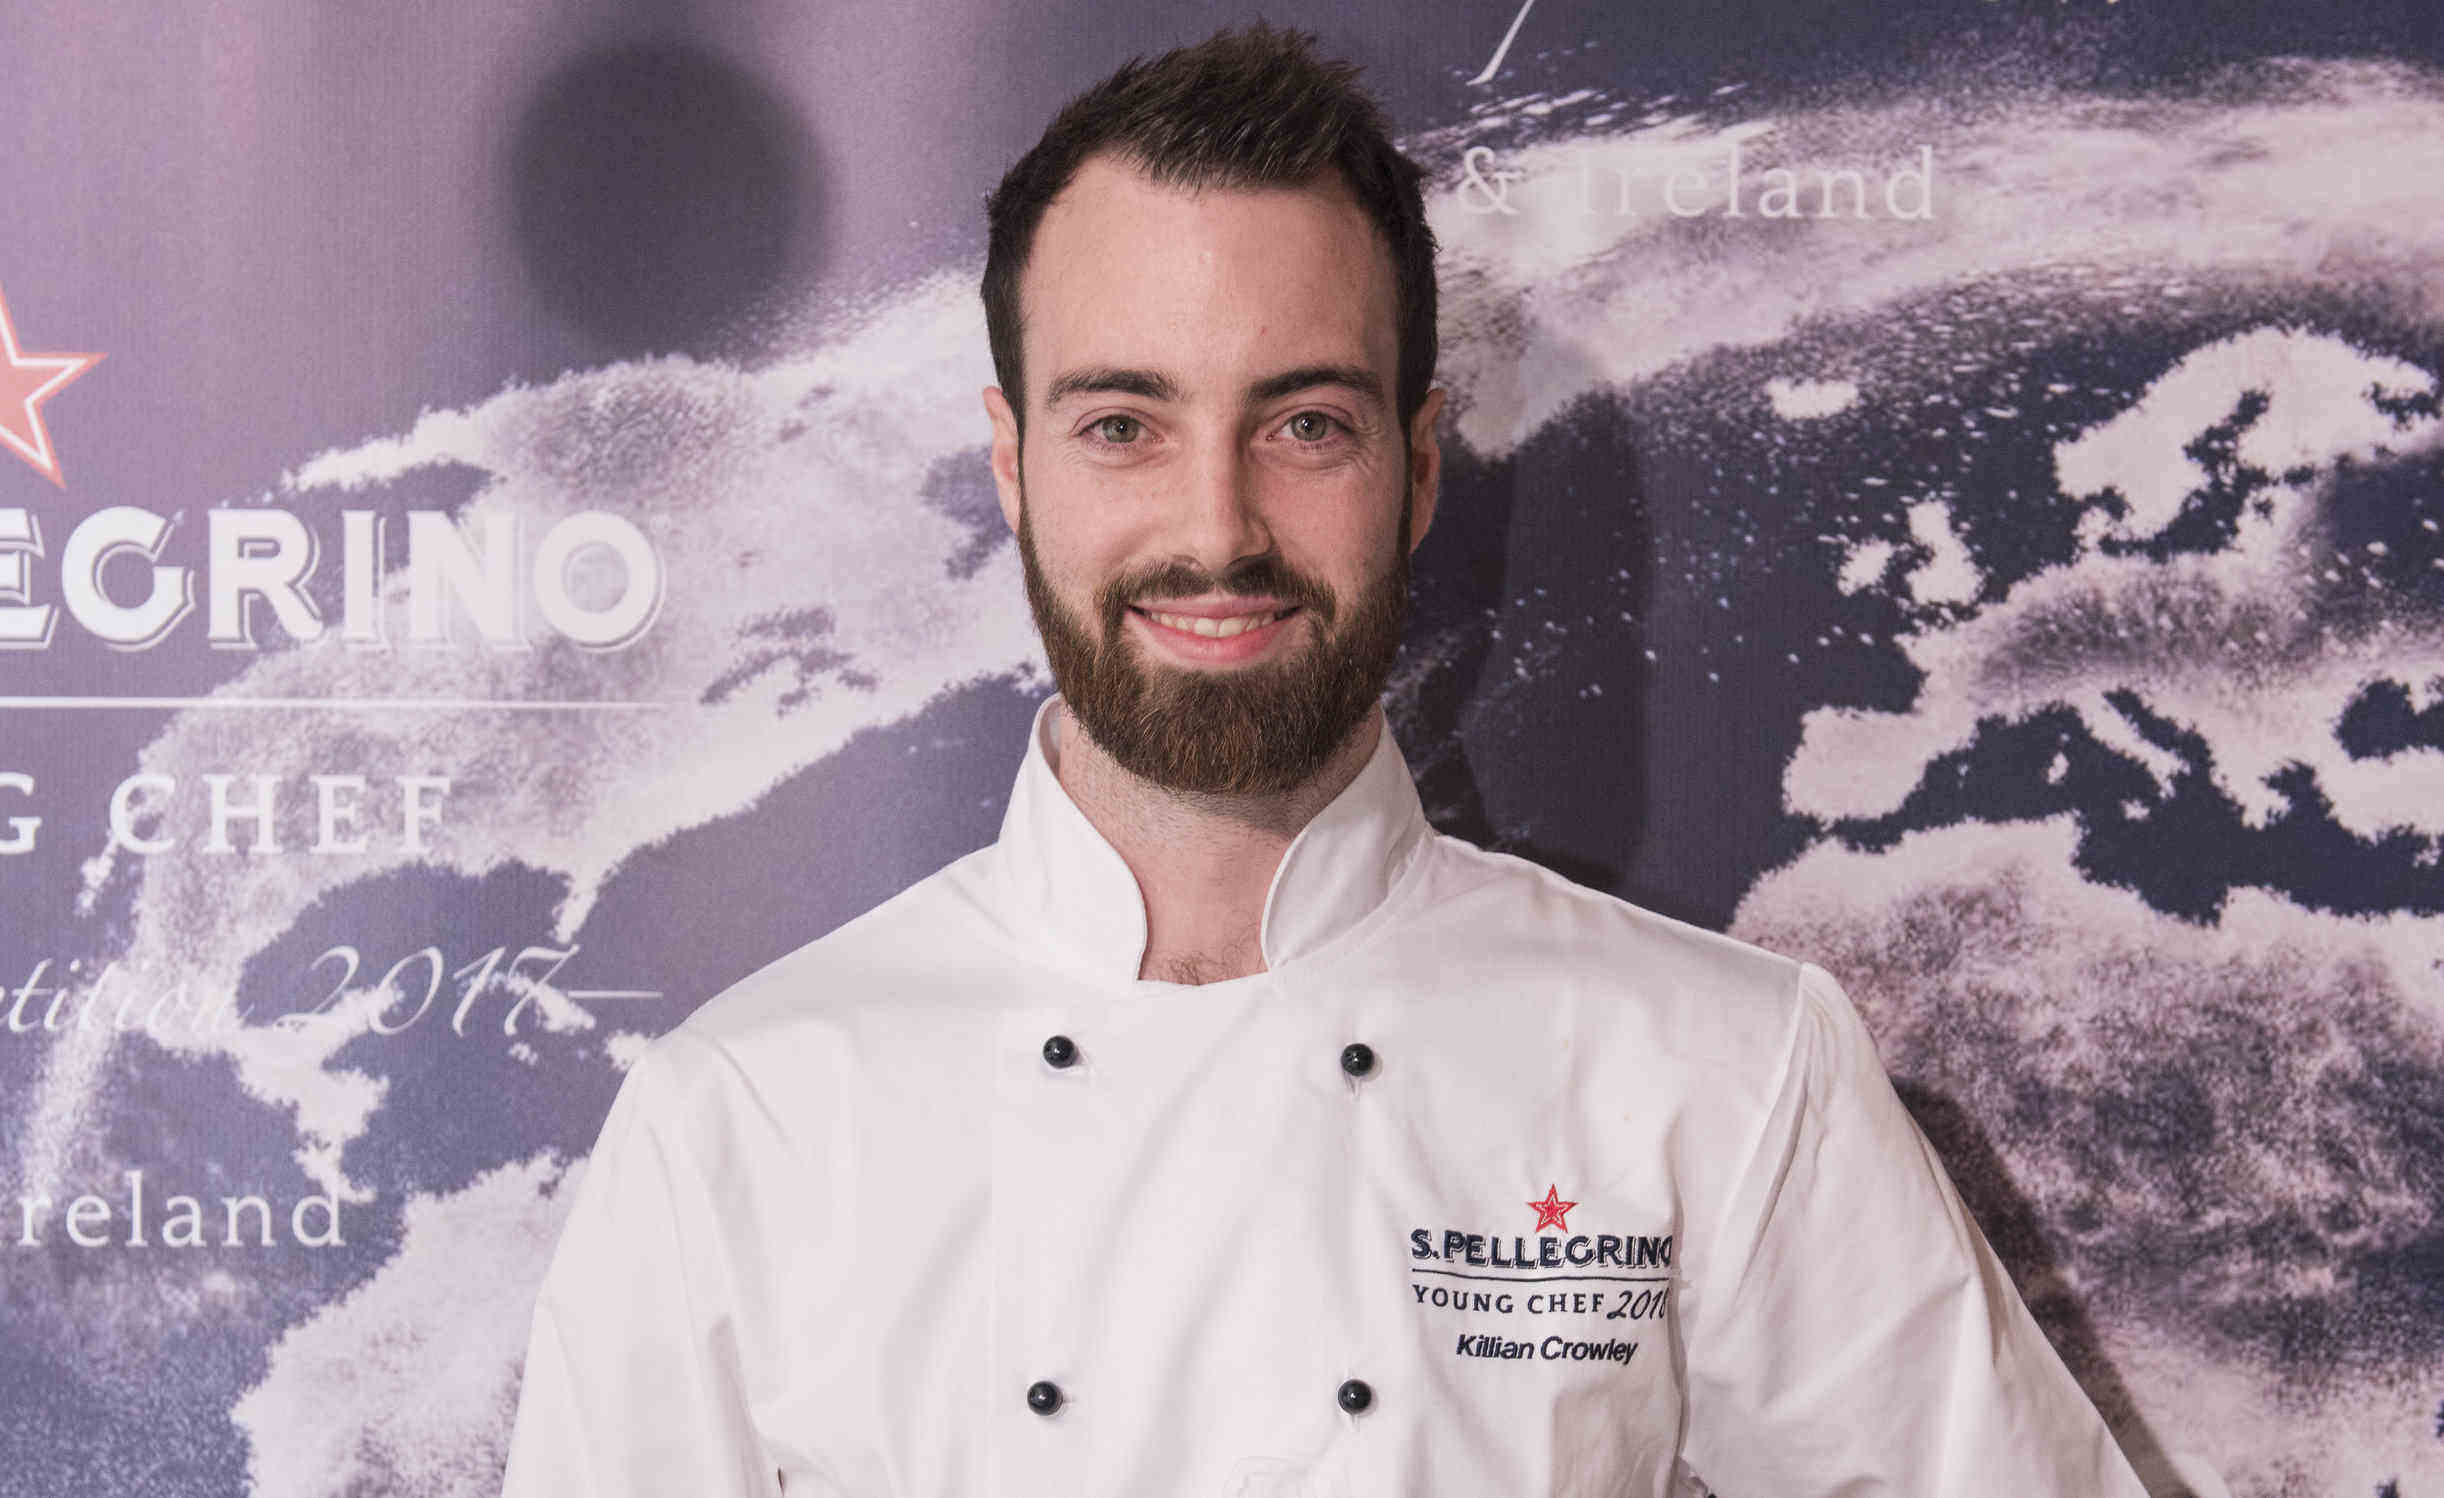 From April 16th, one can to go to www.finedininglovers.com and show support for the Ireland & UK finalist Killian Crowley.